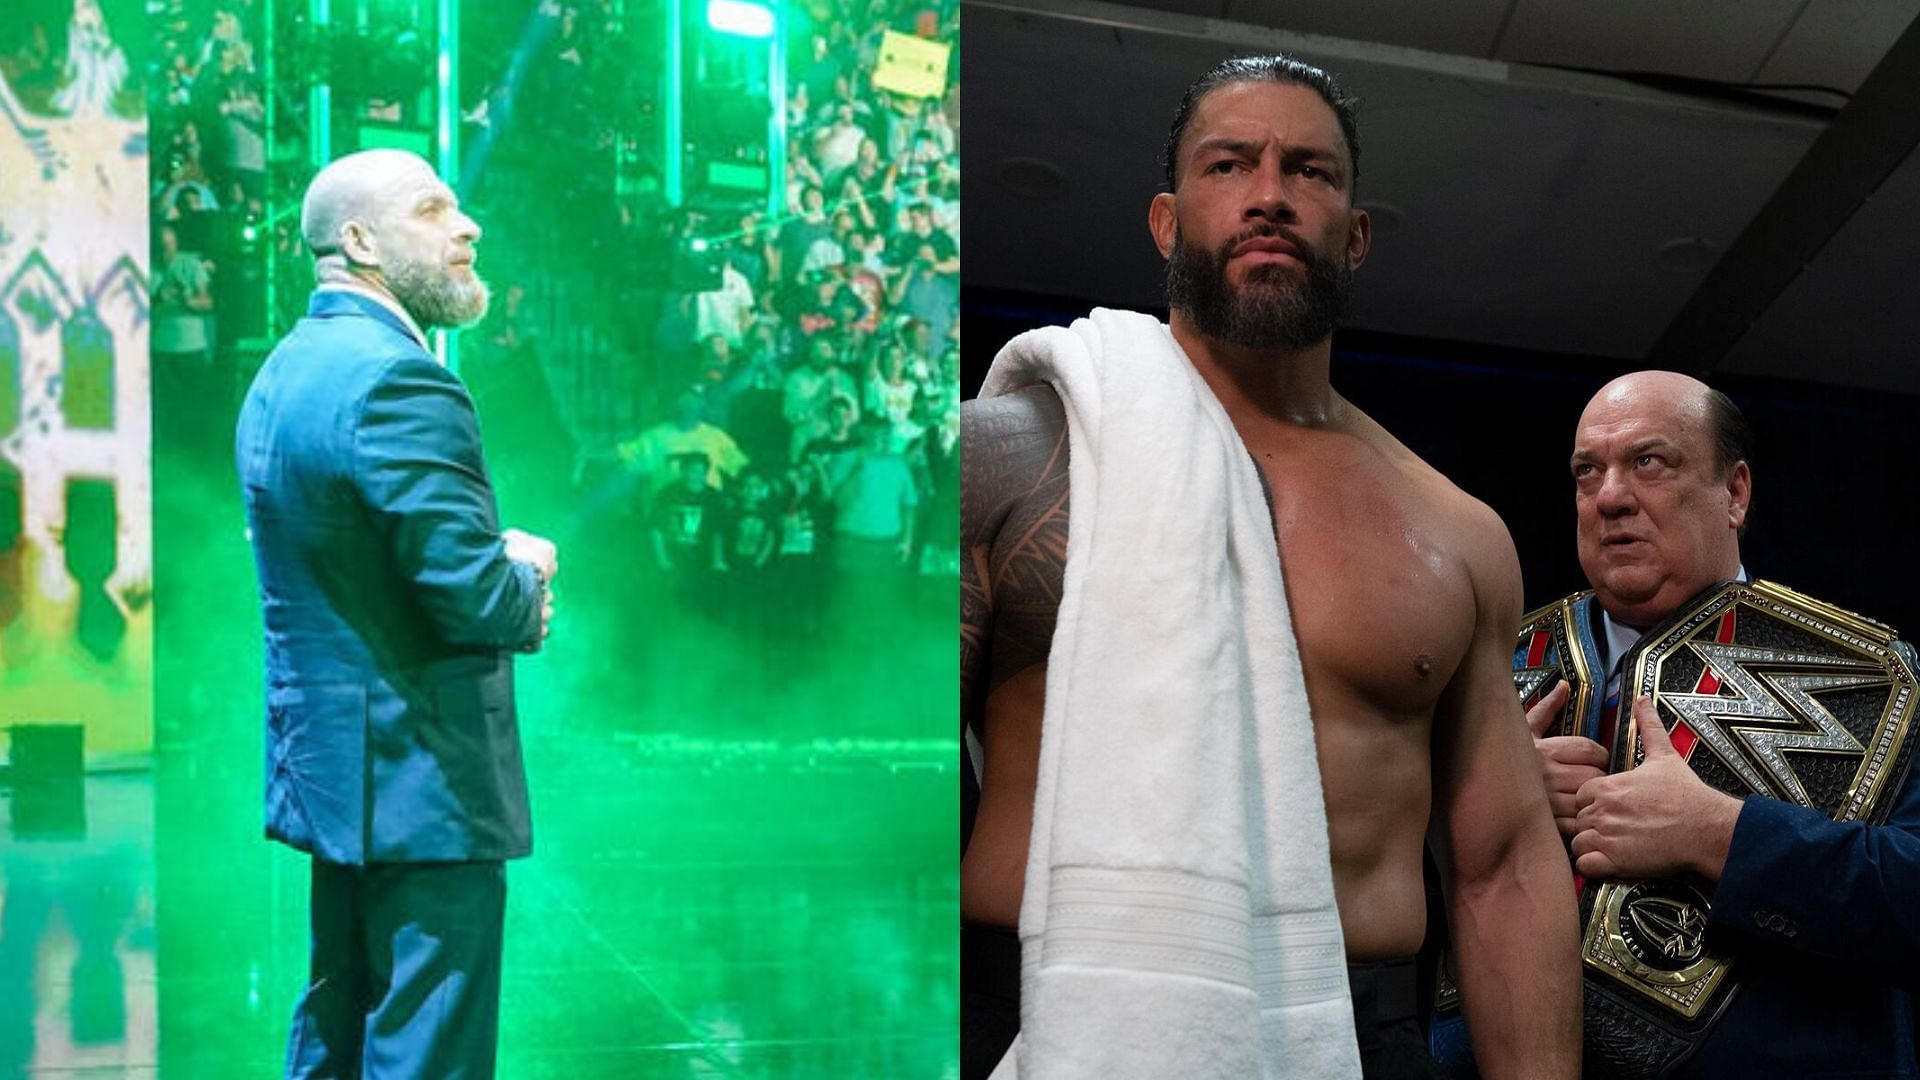 Triple H is the Chief Content Officer of WWE and Roman Reigns is the WWE Undisputed Universal Champion [Photo courtesy of WWE